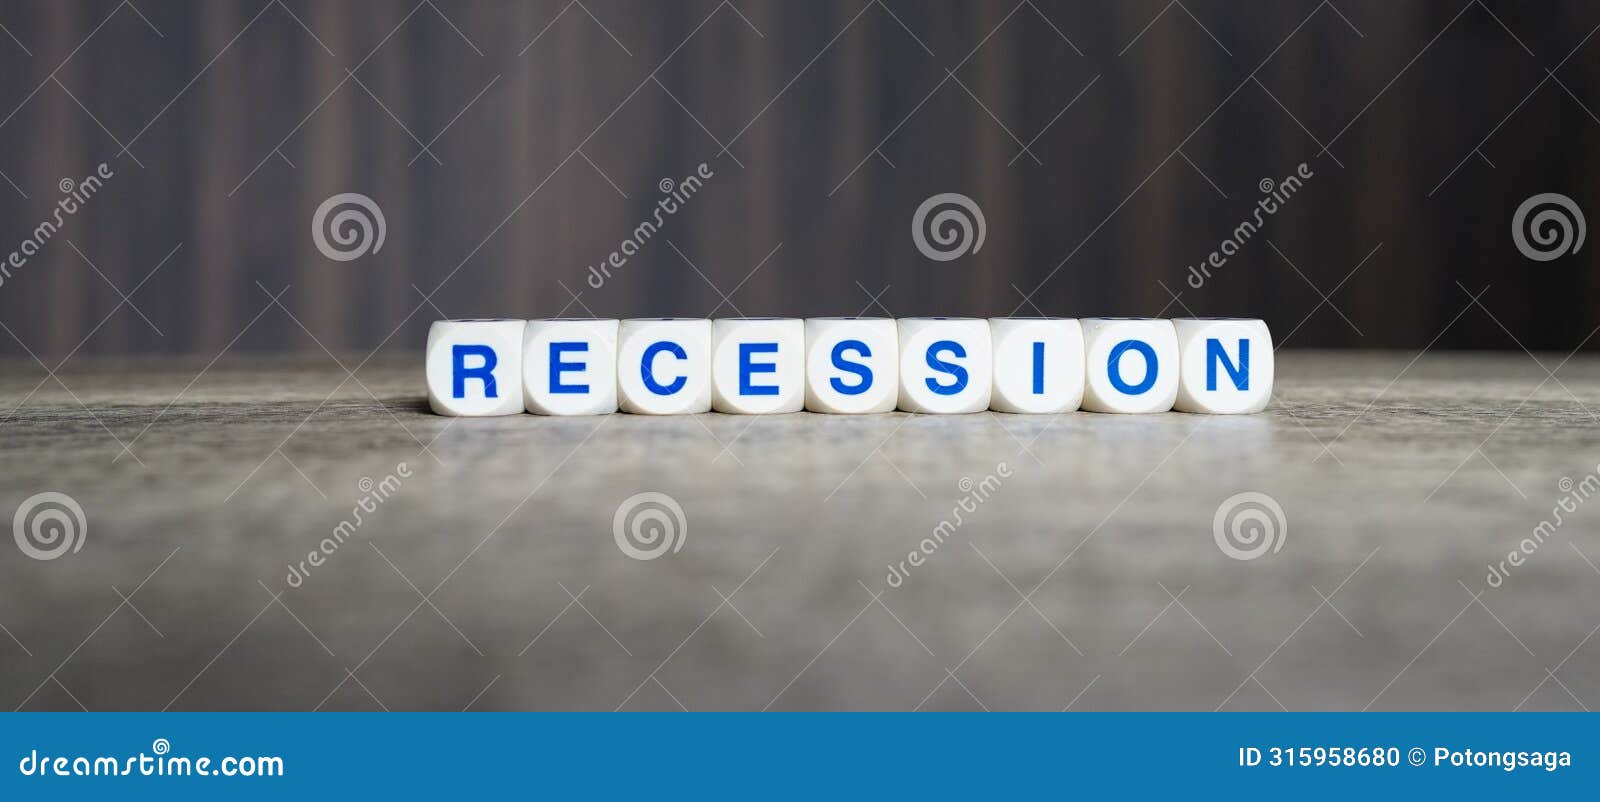 recession boggle word cubes on dark background